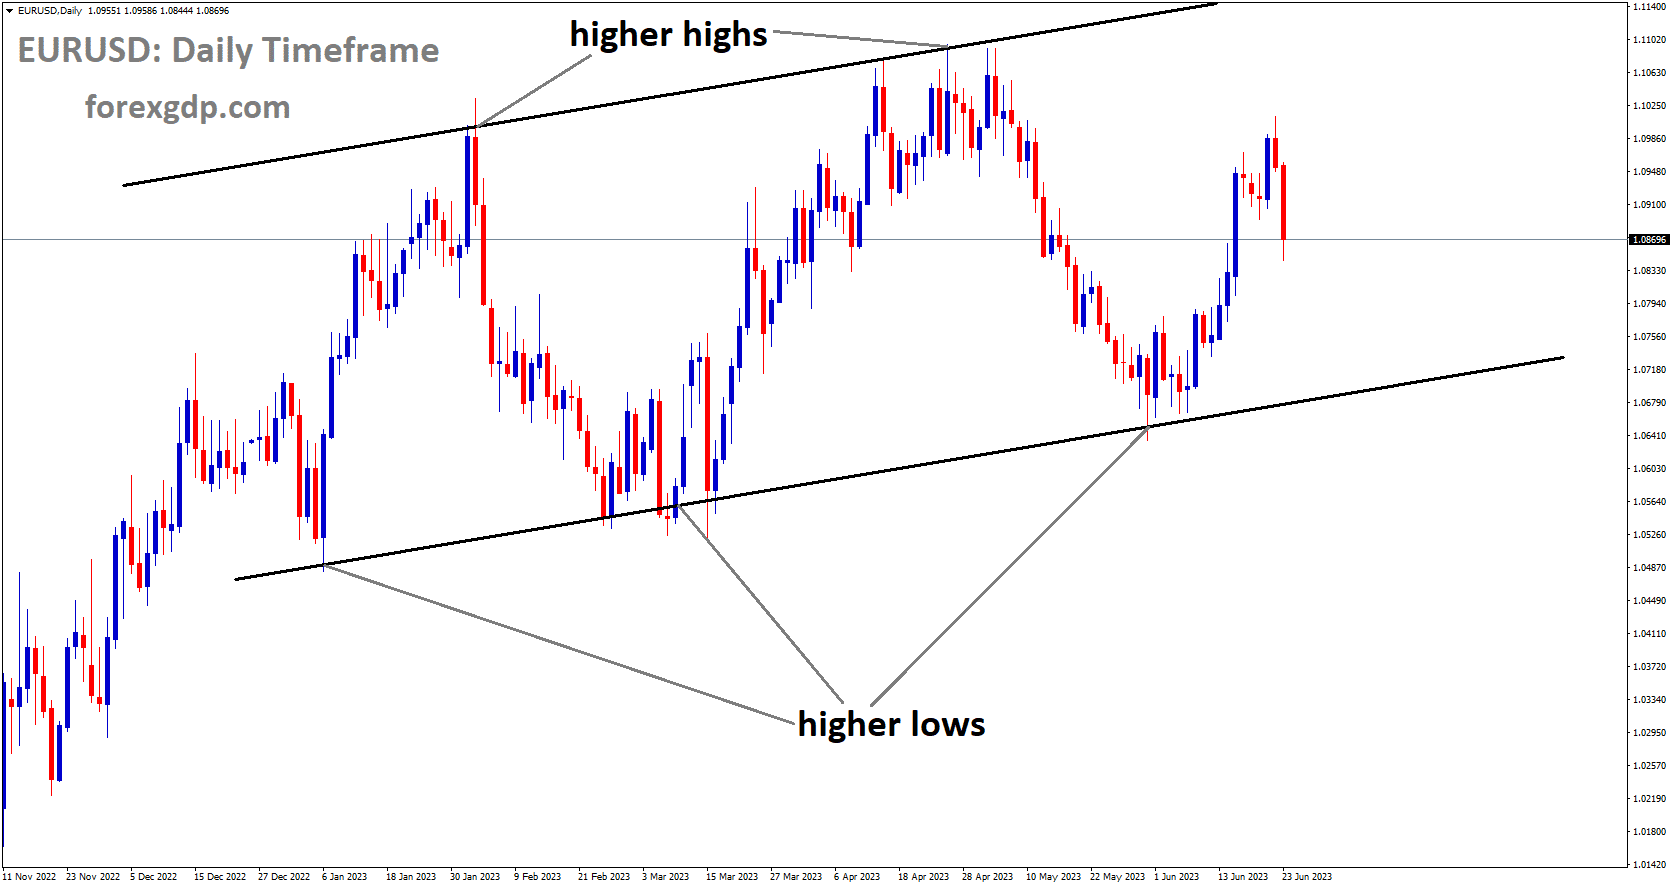 EURUSD is moving an Ascending channel and the market has rebounded from the higher low area of the channel.